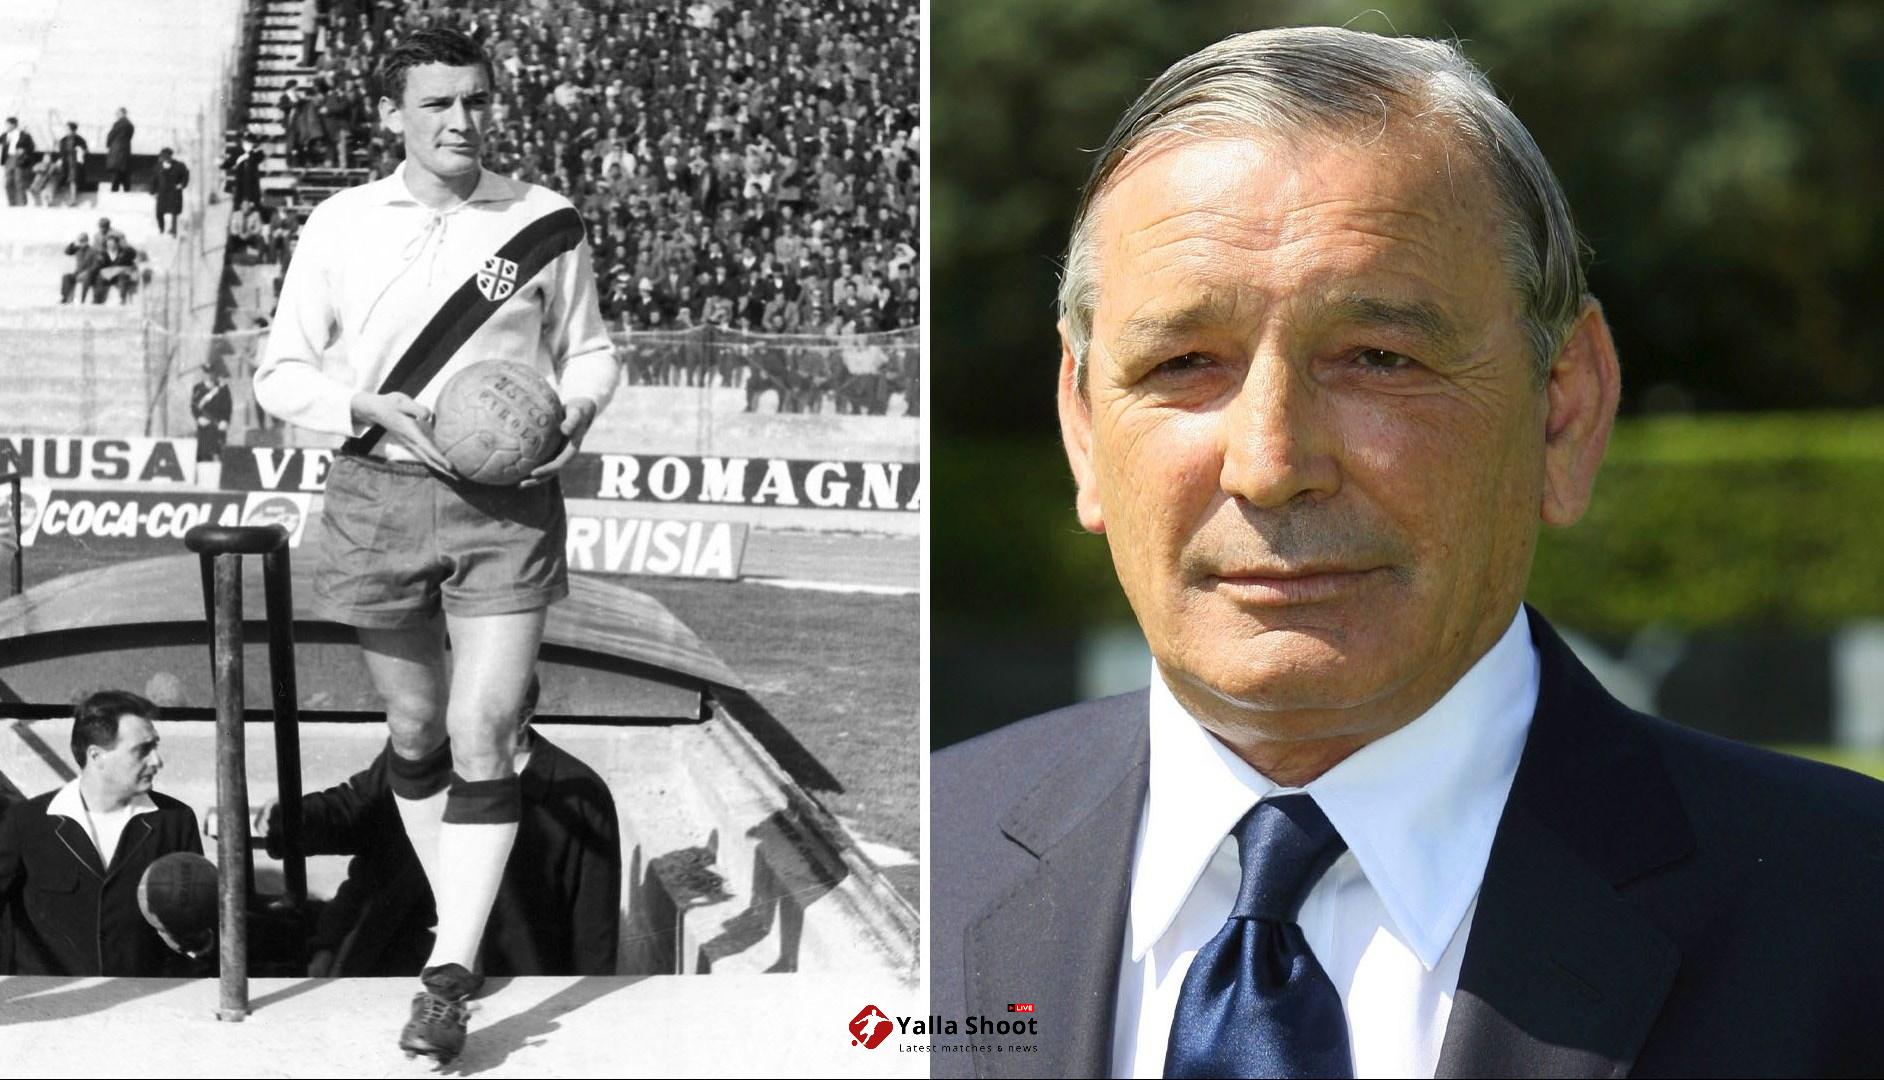 Gigi Riva dead aged 79: Tributes pour in for Serie A icon who won Euros with Italy before becoming national team coach